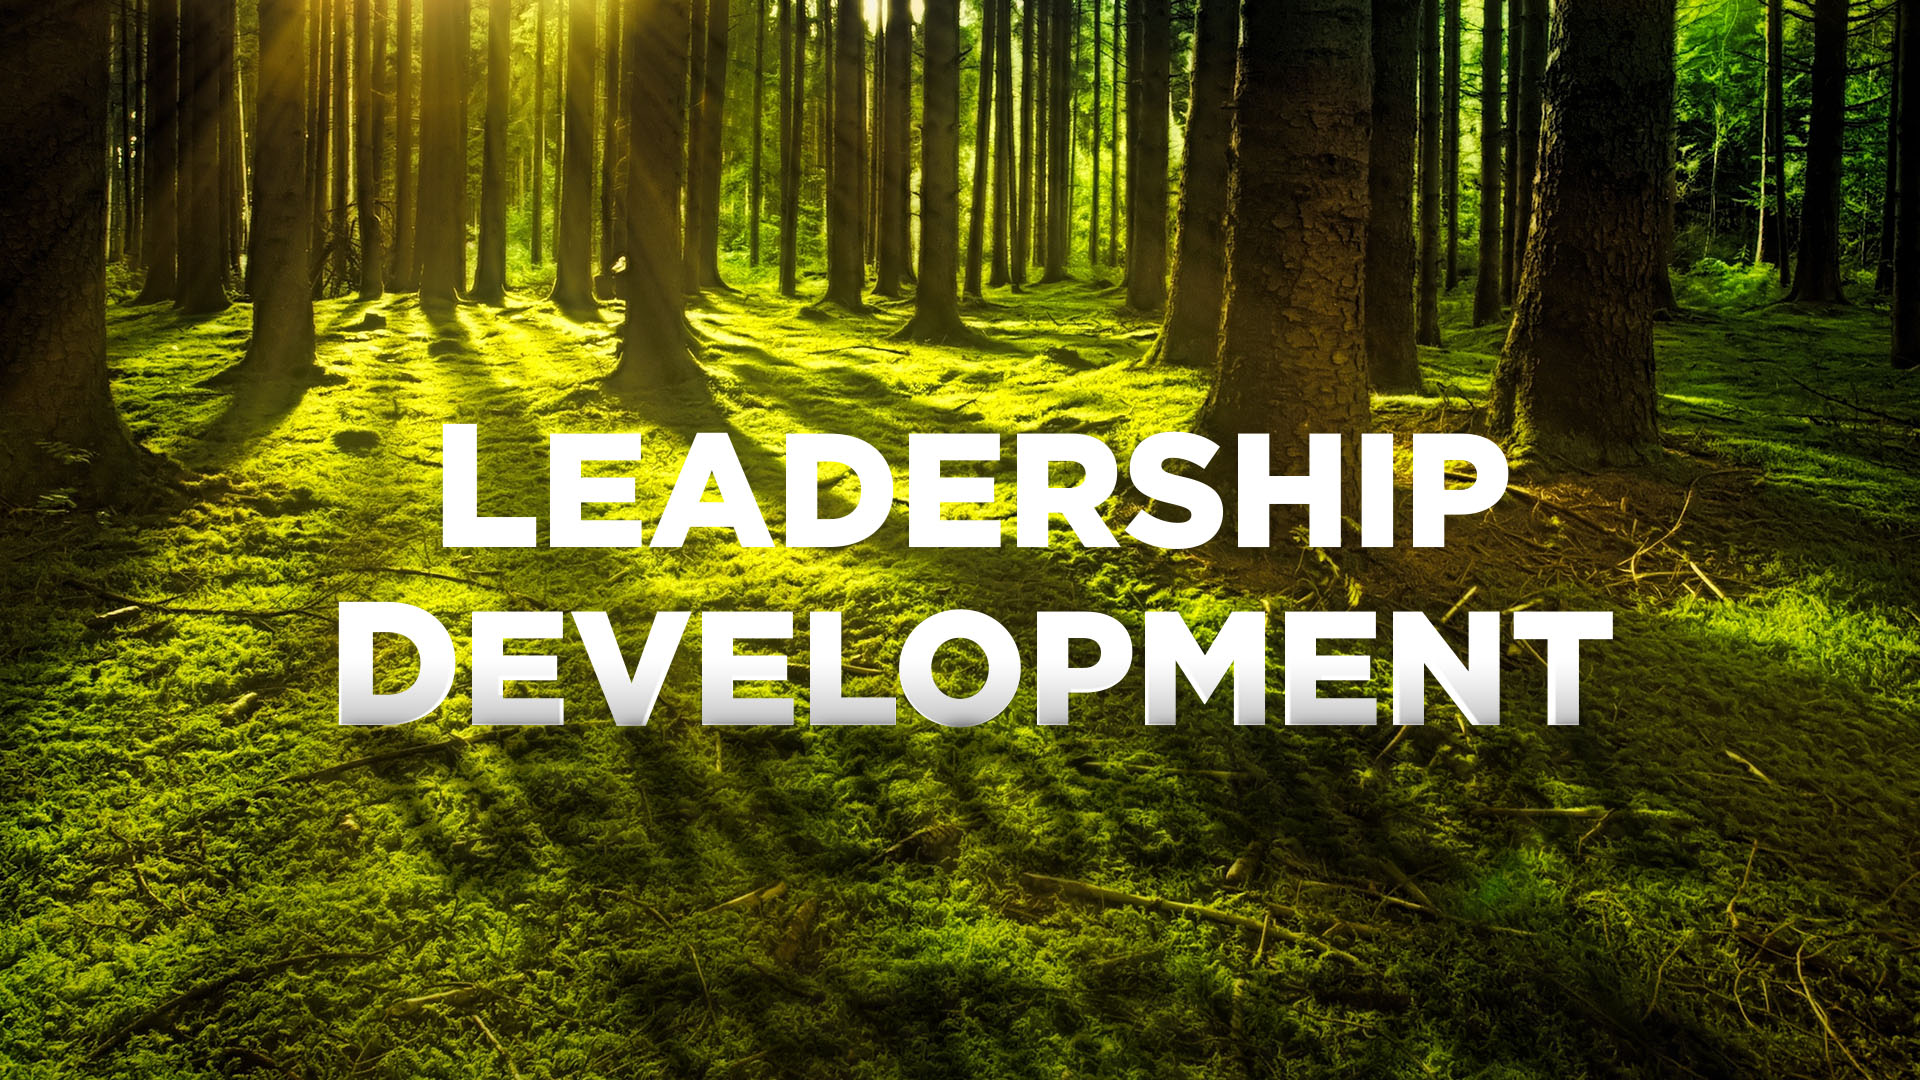 the forest of leadership development